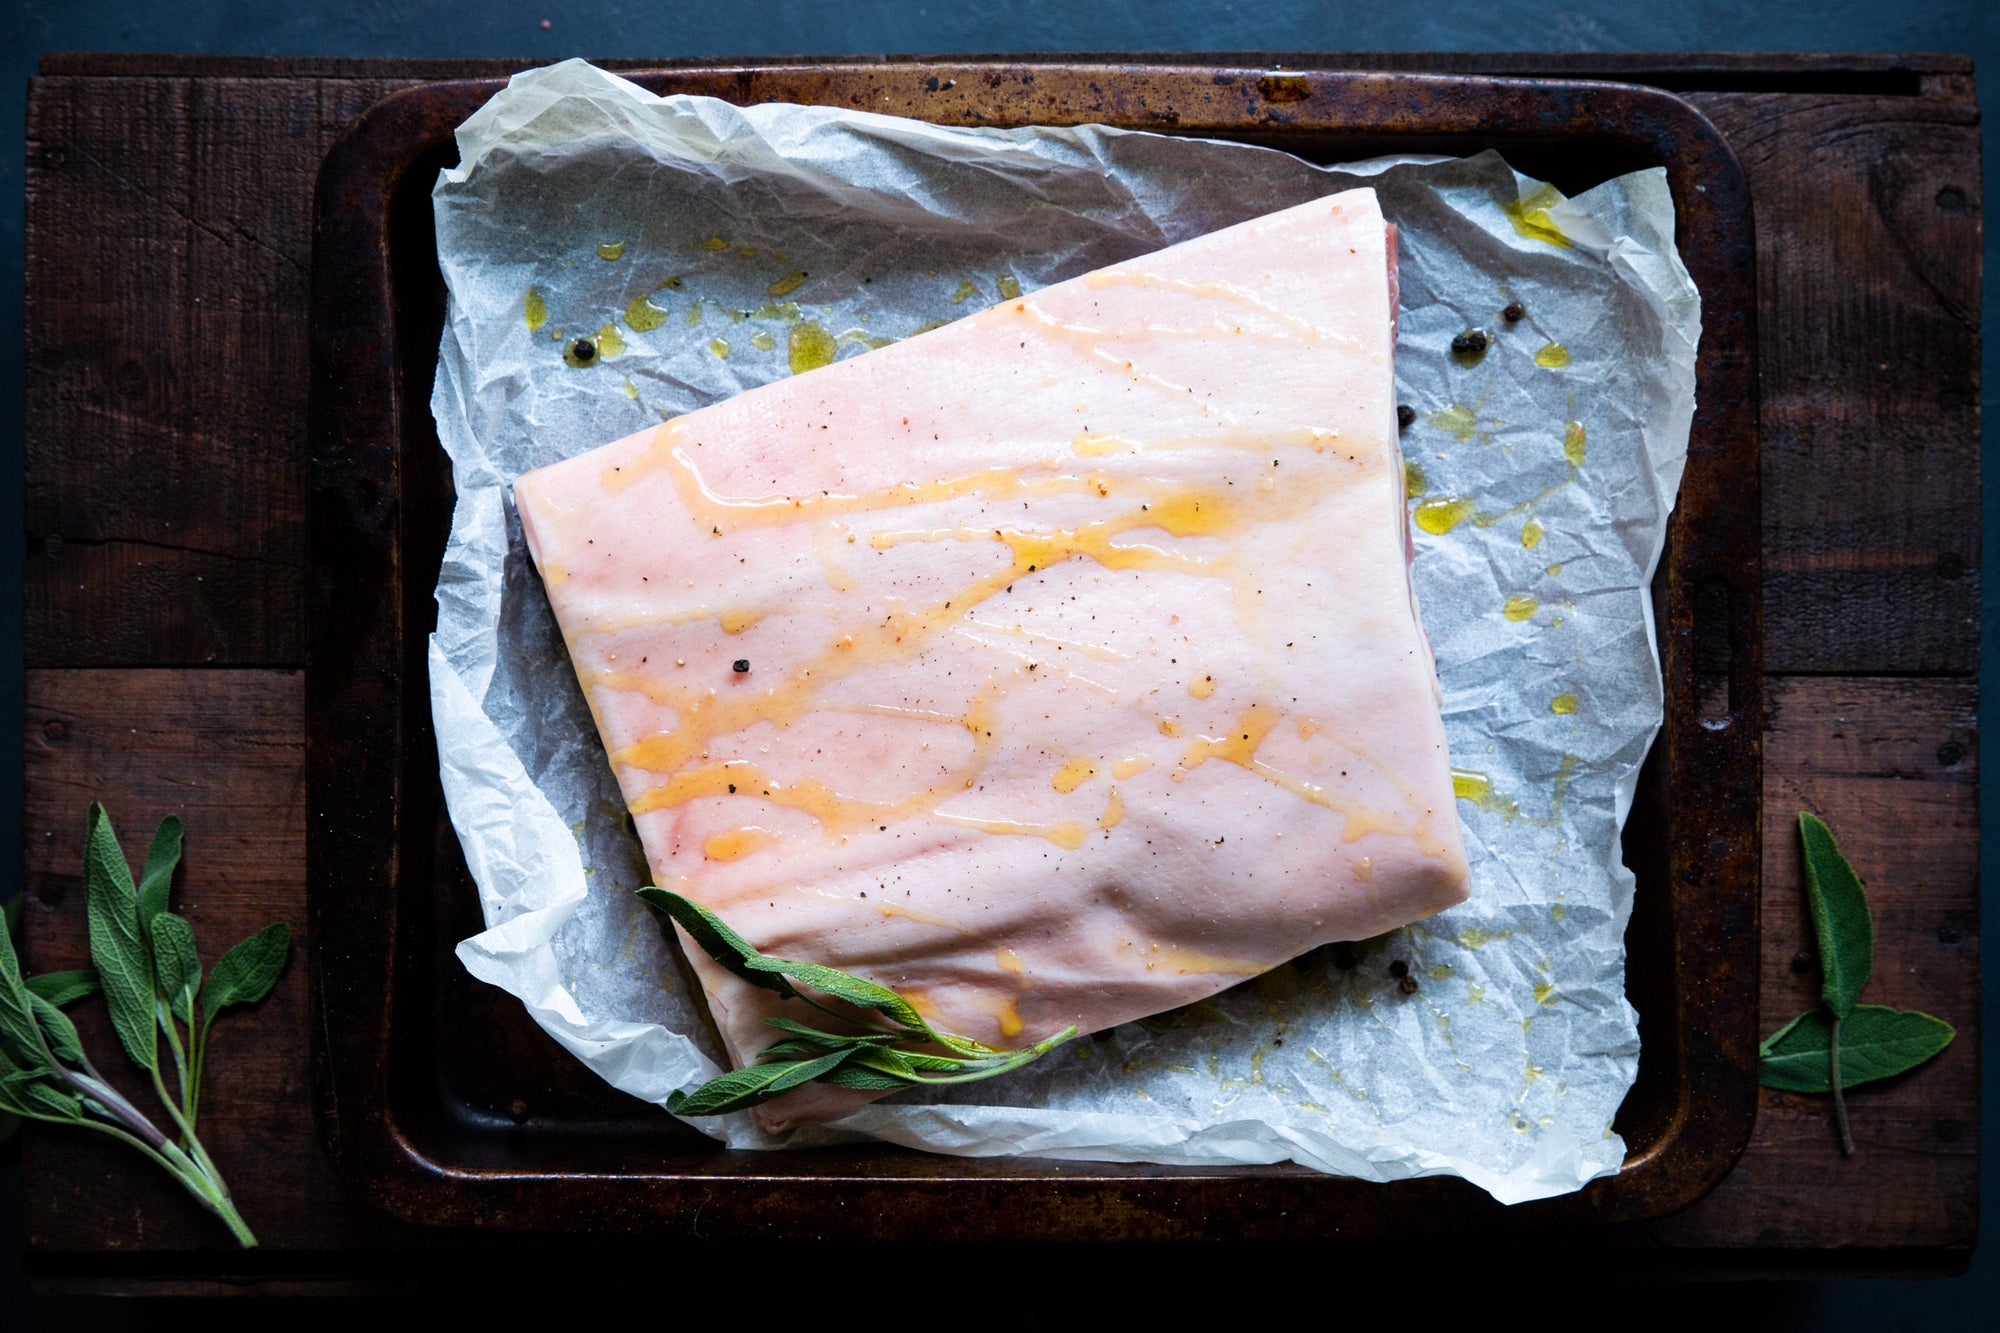  A great pork belly cut in a roasting tray with olive oil and seasoning on the skin